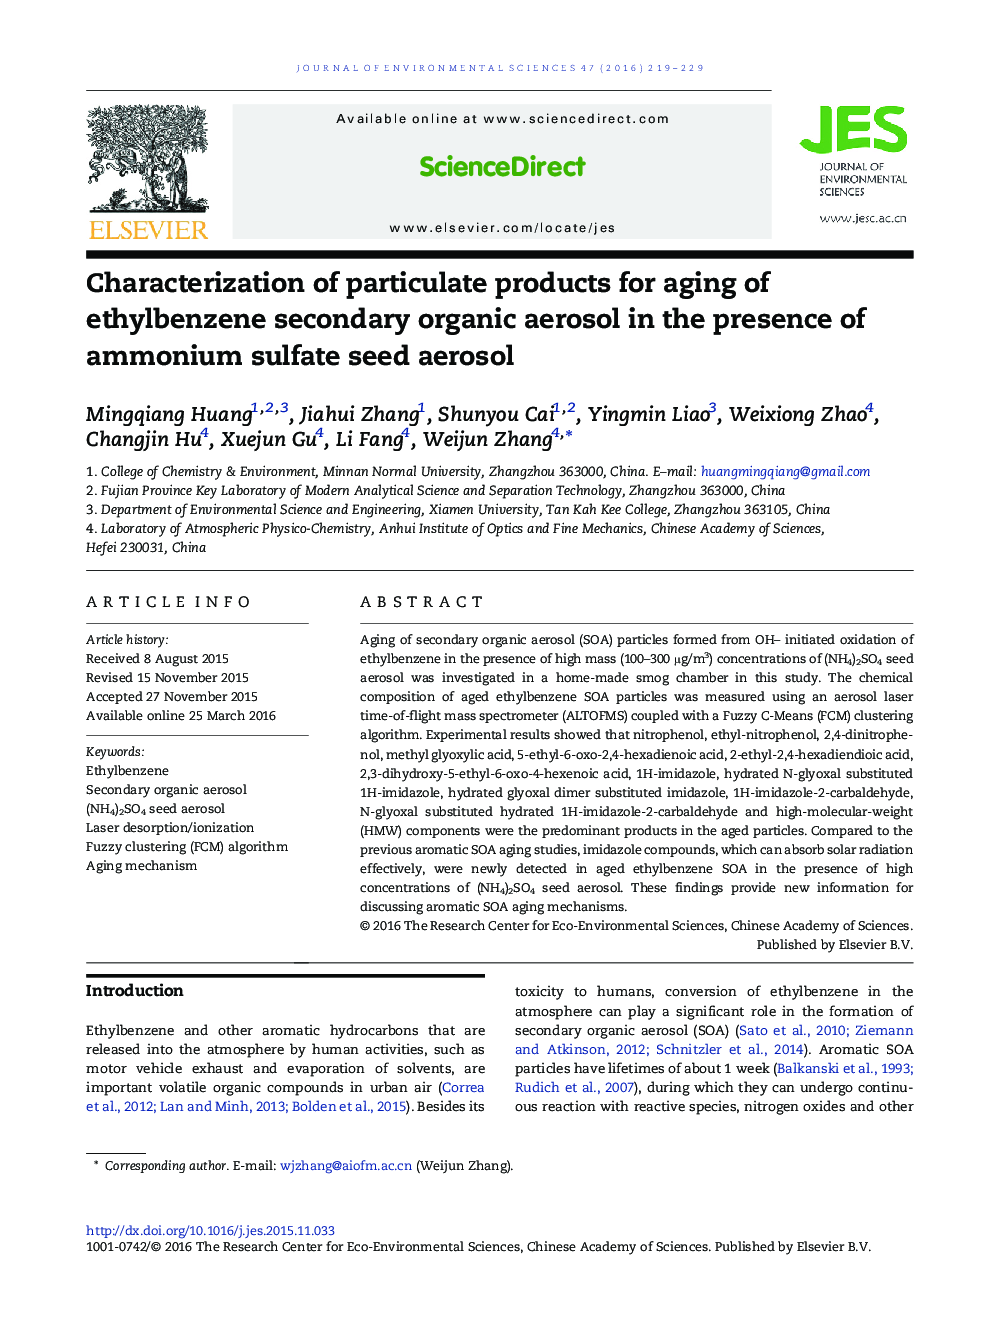 Characterization of particulate products for aging of ethylbenzene secondary organic aerosol in the presence of ammonium sulfate seed aerosol